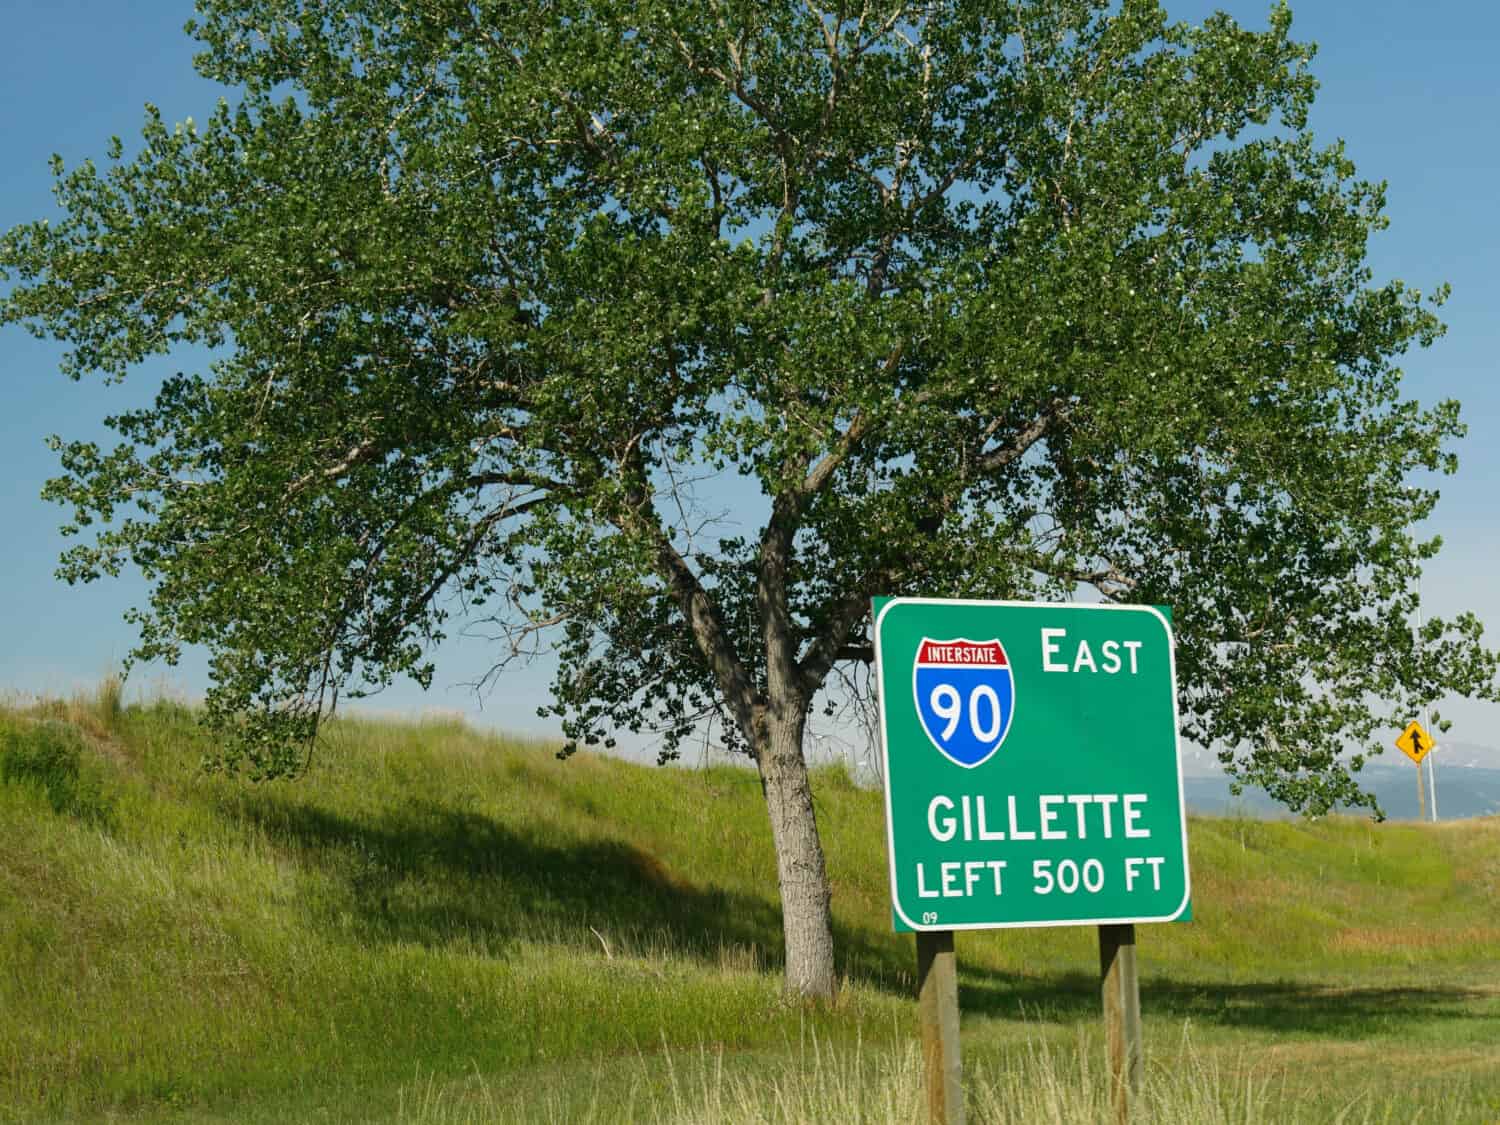 Roadside sign by a tree at Interstate 90 with distance to Gillette, Wyoming.